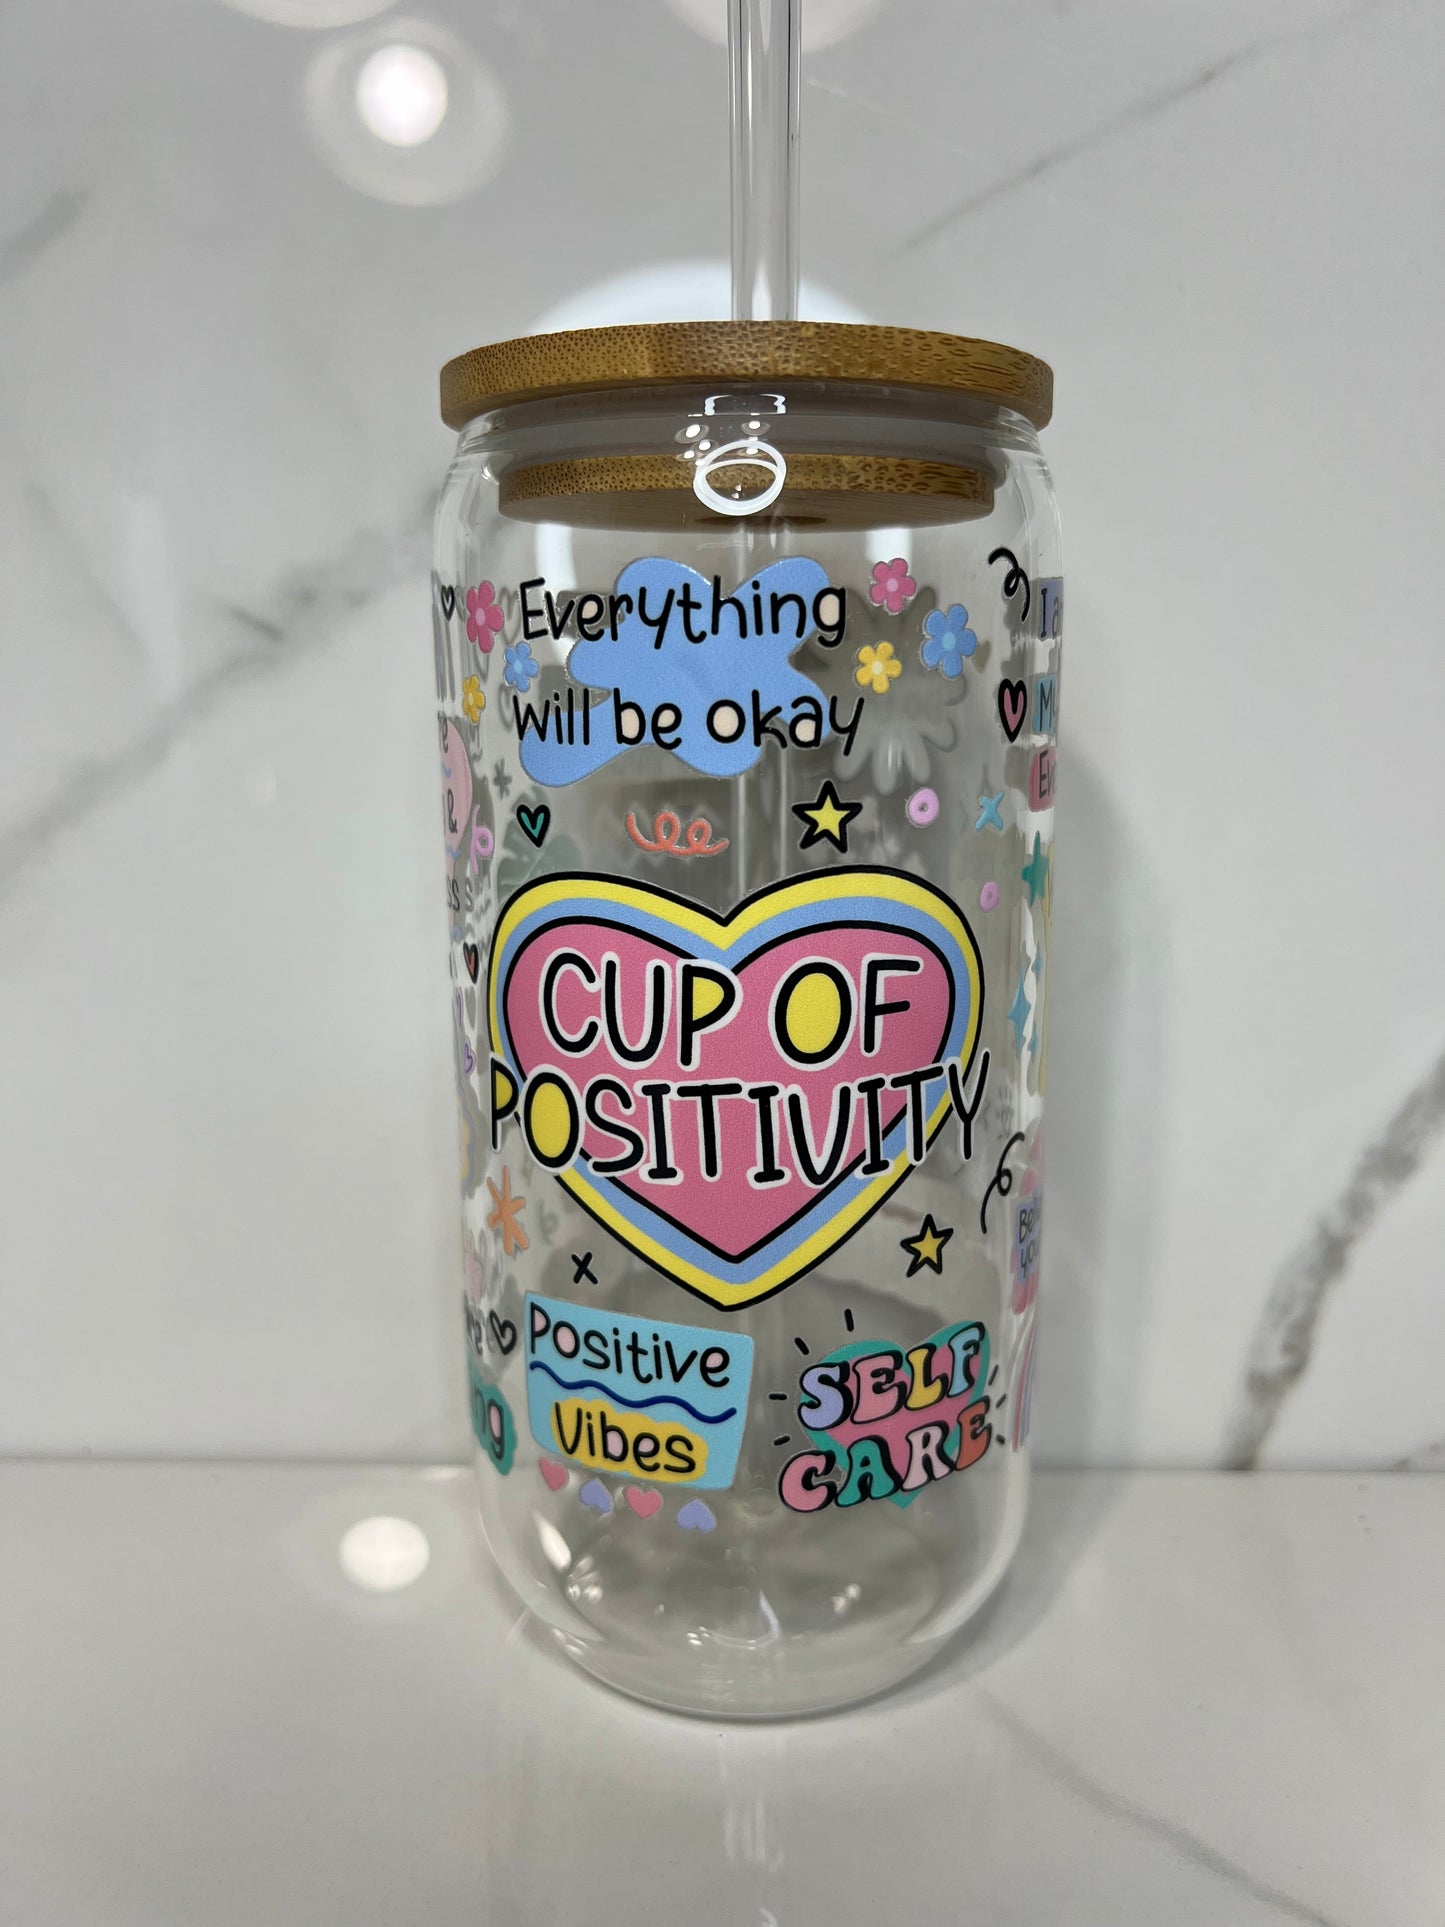 Cup of positivity